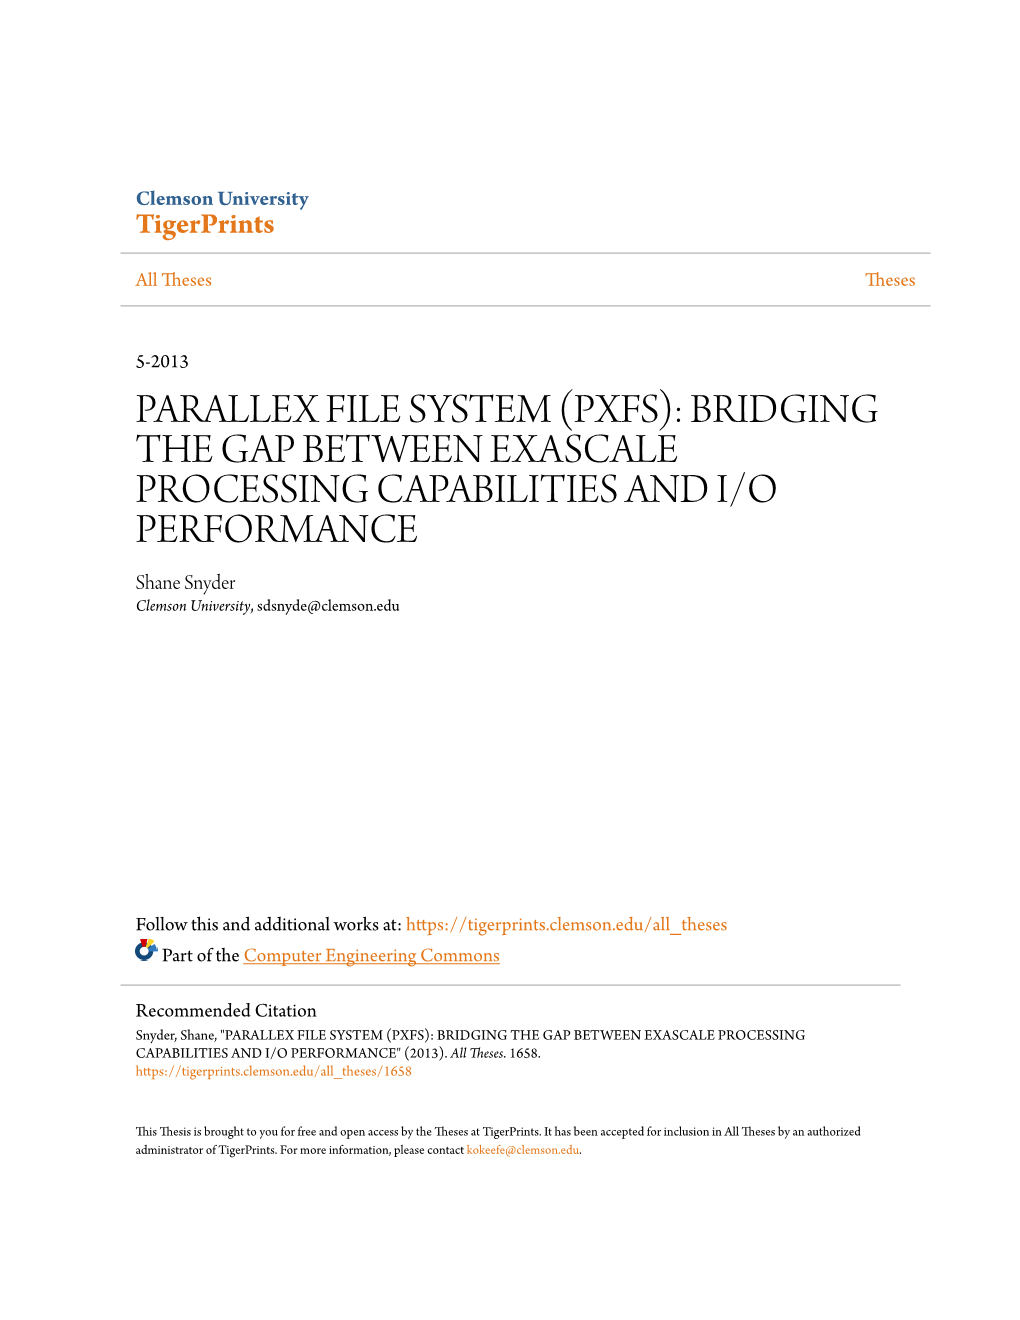 PARALLEX FILE SYSTEM (PXFS): BRIDGING the GAP BETWEEN EXASCALE PROCESSING CAPABILITIES and I/O PERFORMANCE Shane Snyder Clemson University, Sdsnyde@Clemson.Edu